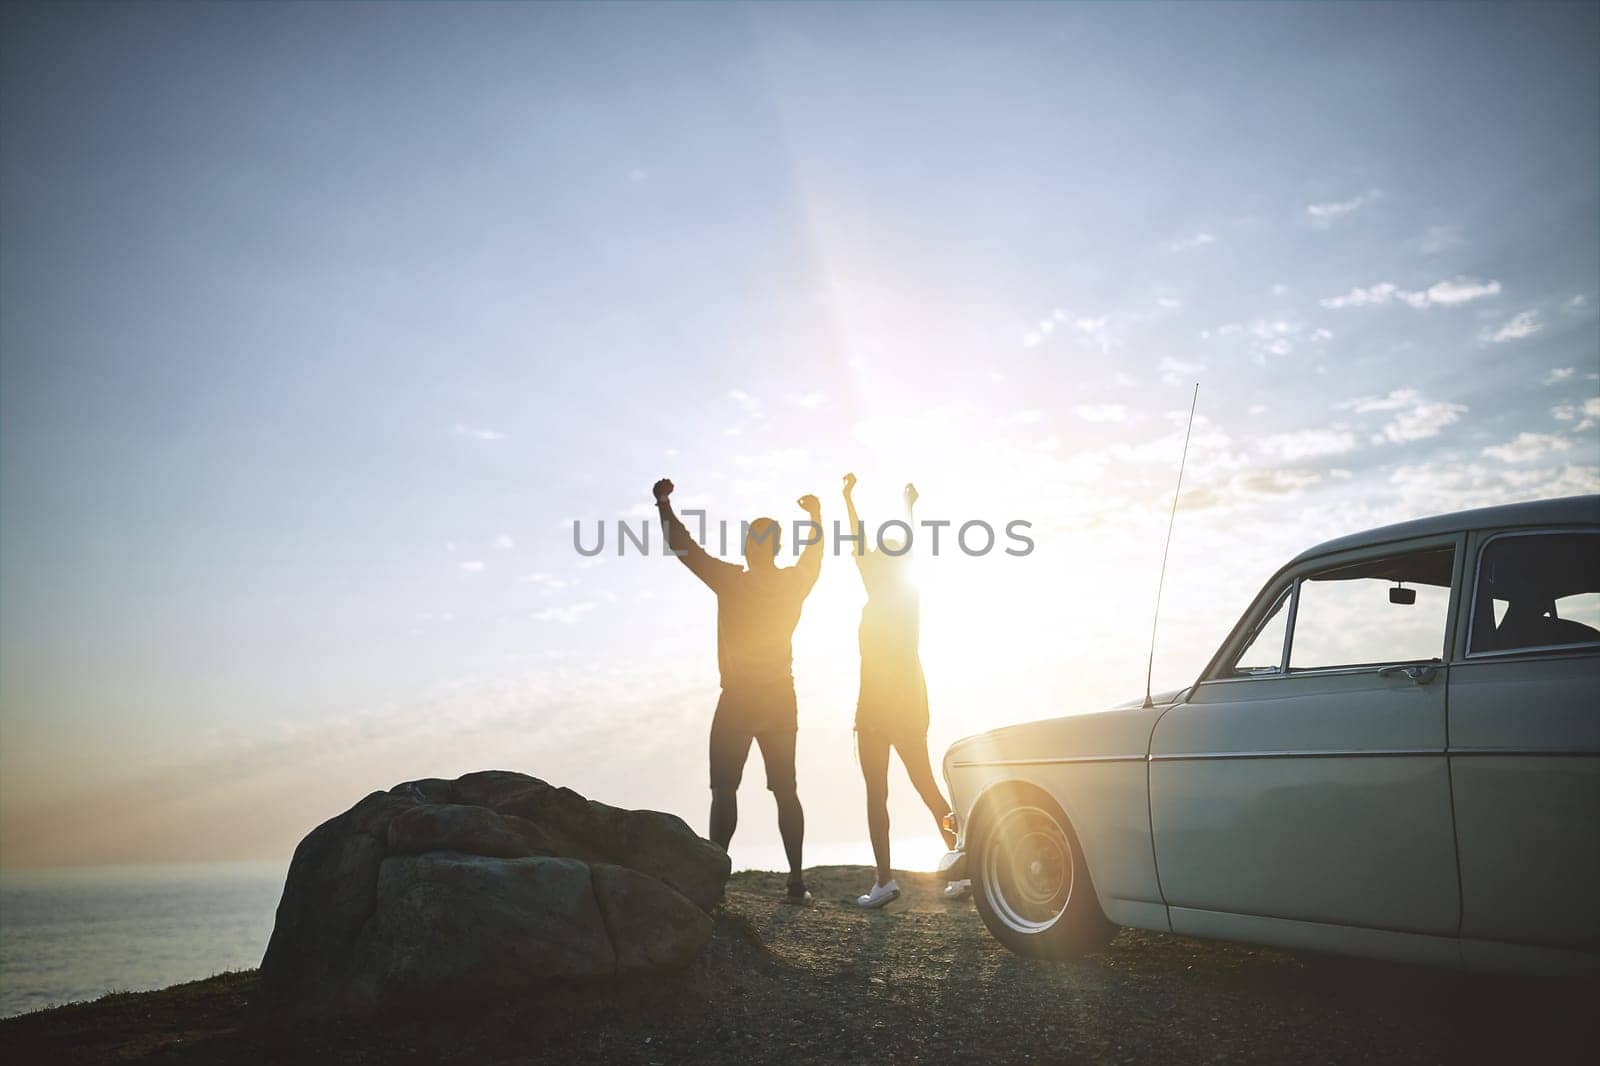 Life is pretty amazing. a young couple making a stop at the beach while out on a road trip